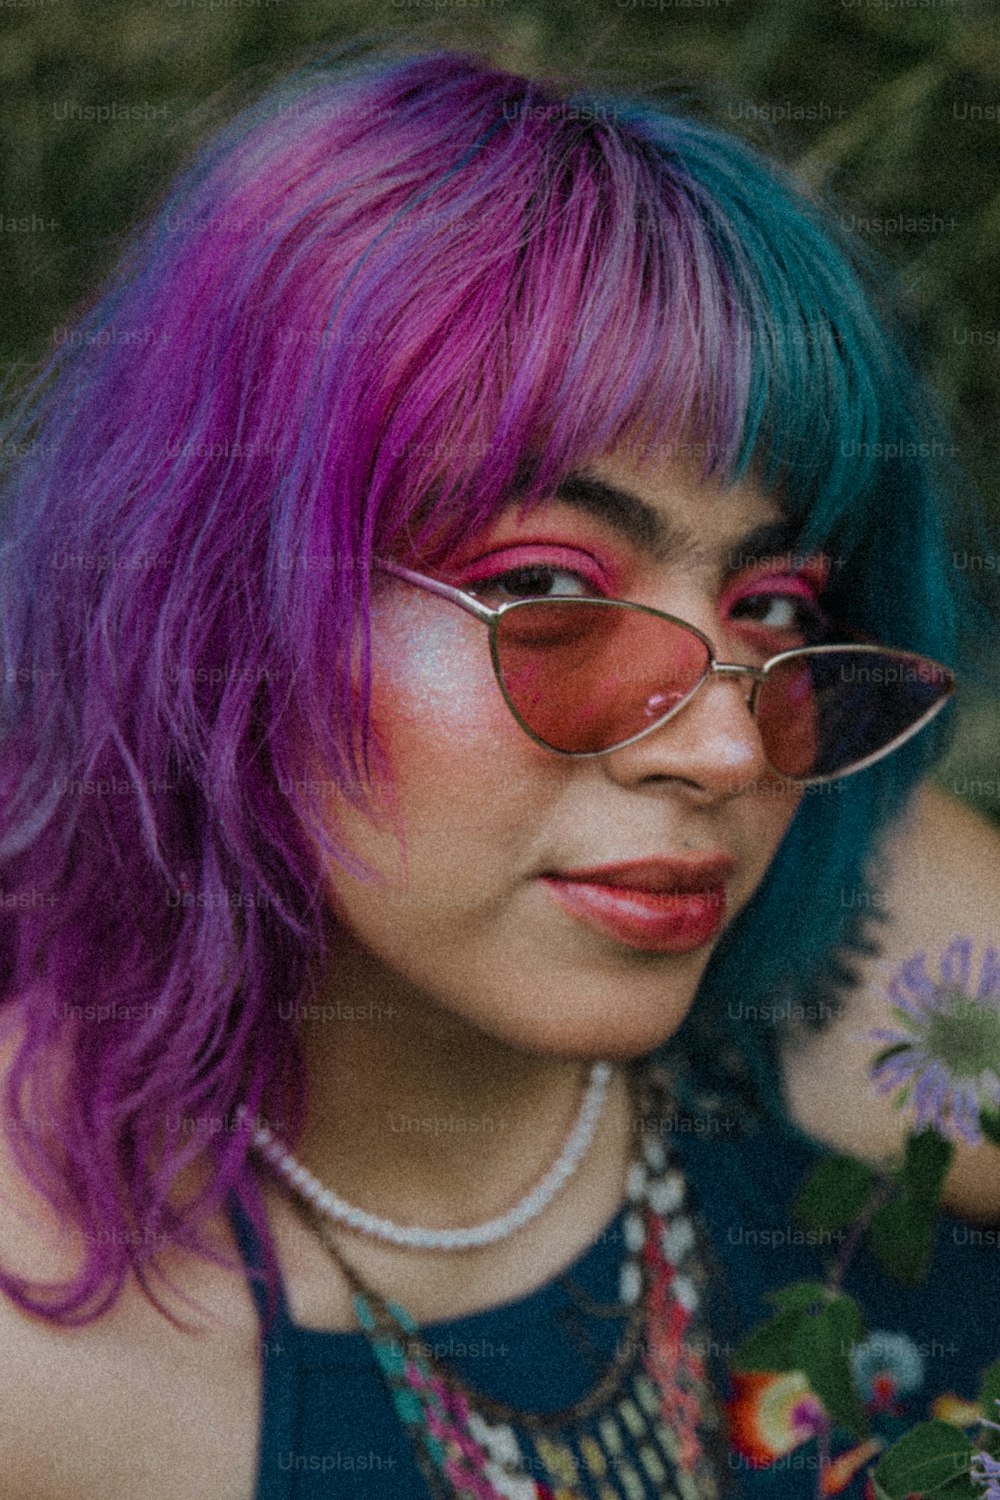 a woman with purple hair wearing glasses and a necklace